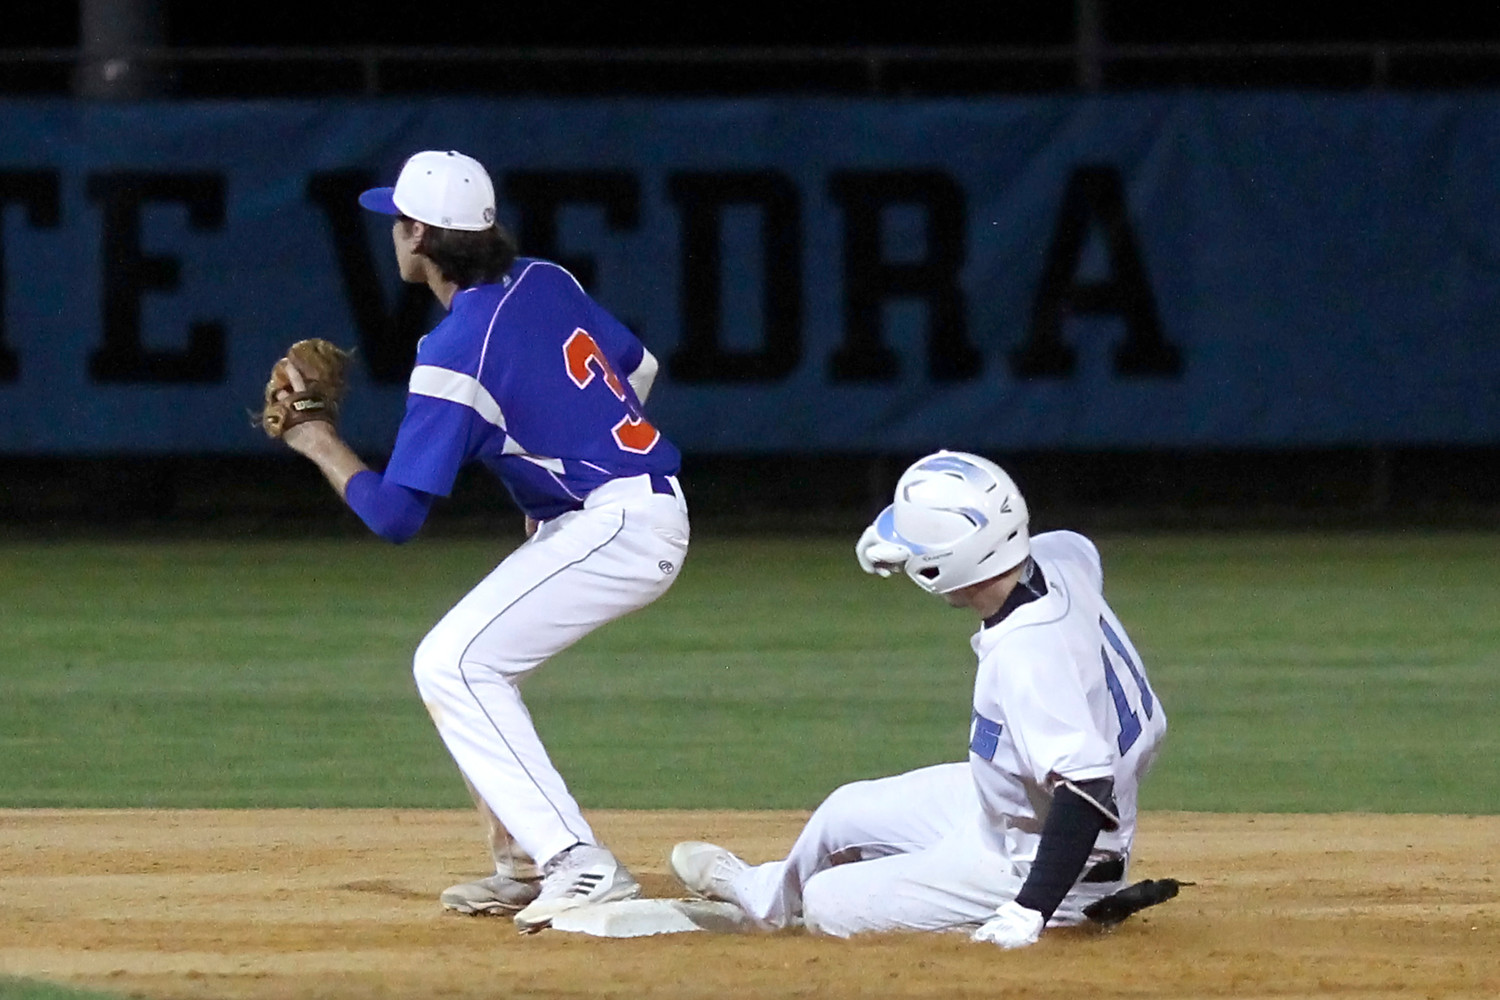 Jacob Young slides safely into second on his double.